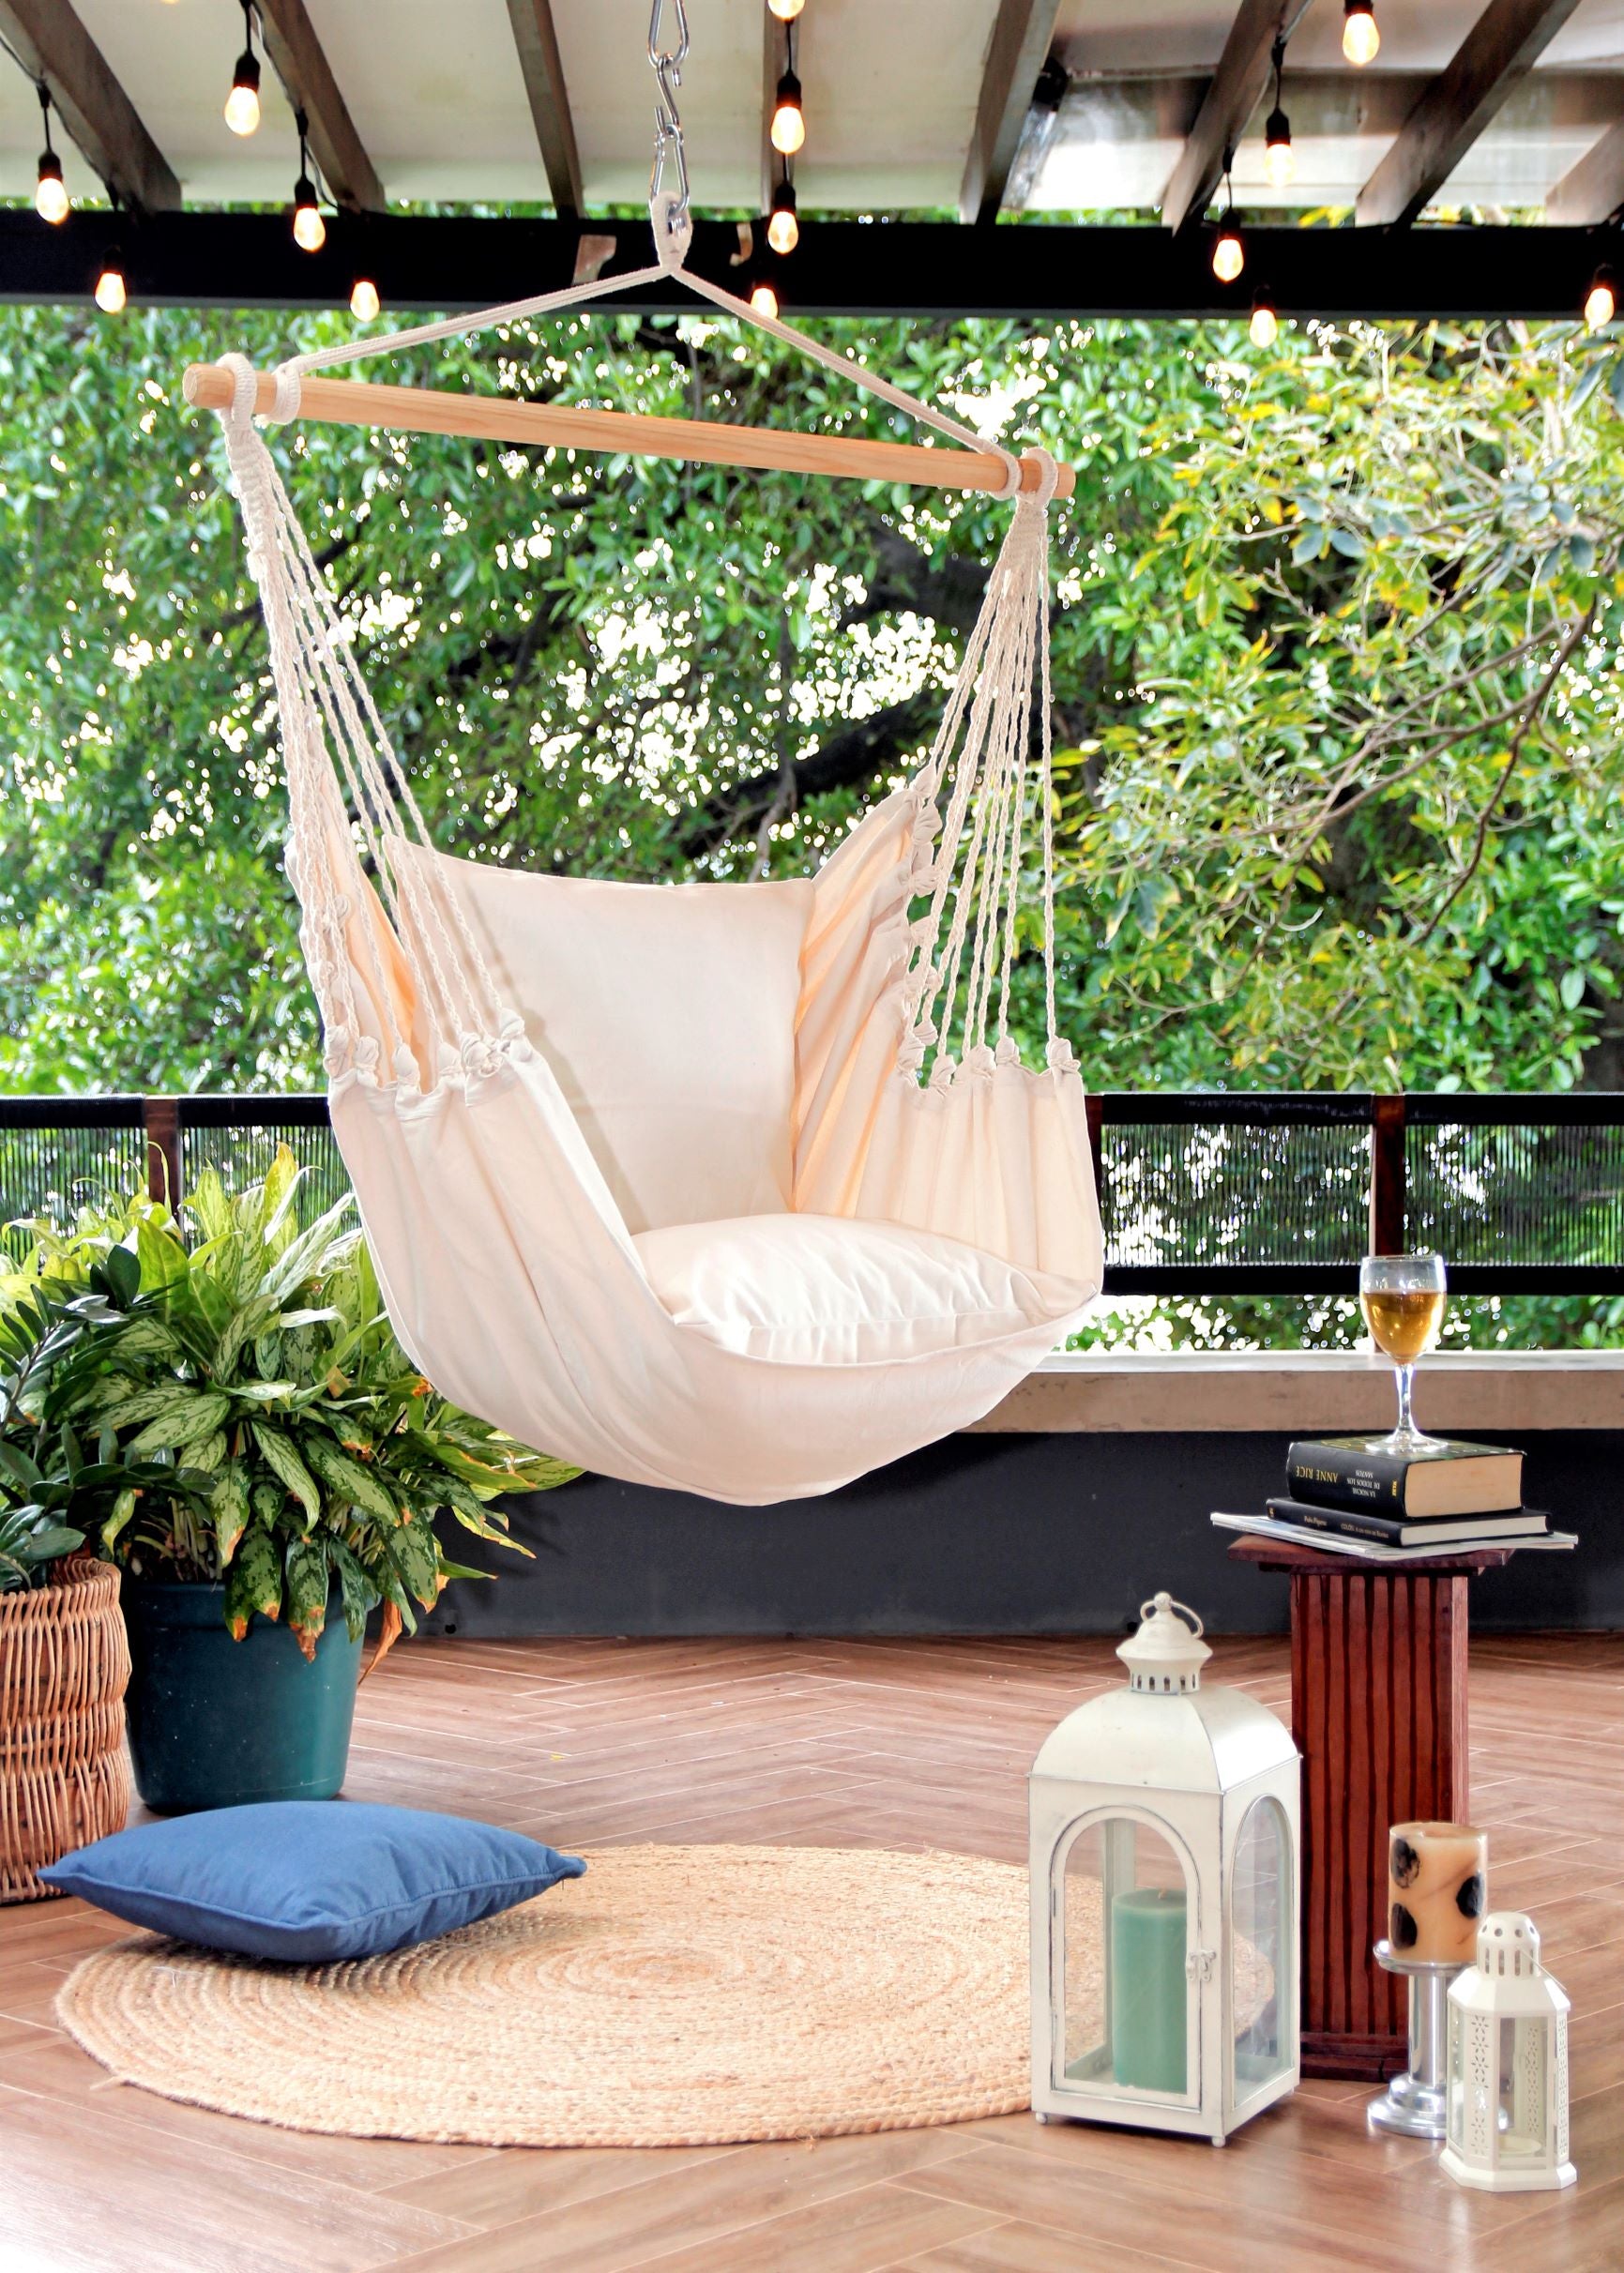 Hanging hammock chair swing on a porch with trees